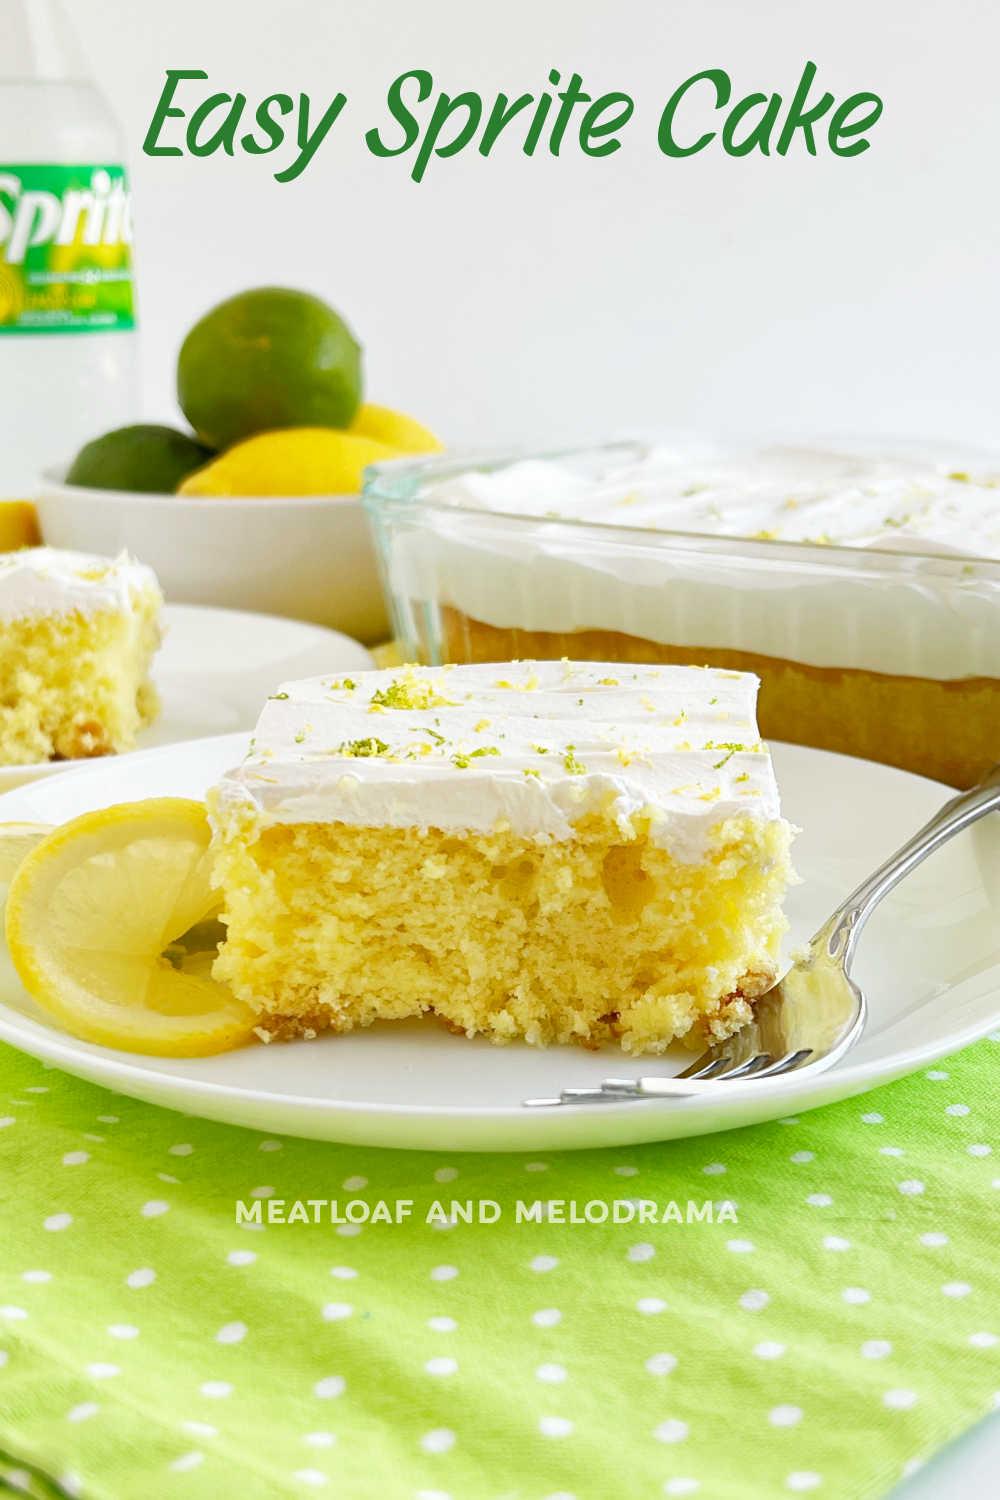 Lemon Lime Soda Cake or Sprite Cake recipe is made with boxed cake mix and a can of soda pop. This 2 ingredient cake made without eggs and without oil is an easy dessert everyone loves!  via @meamel